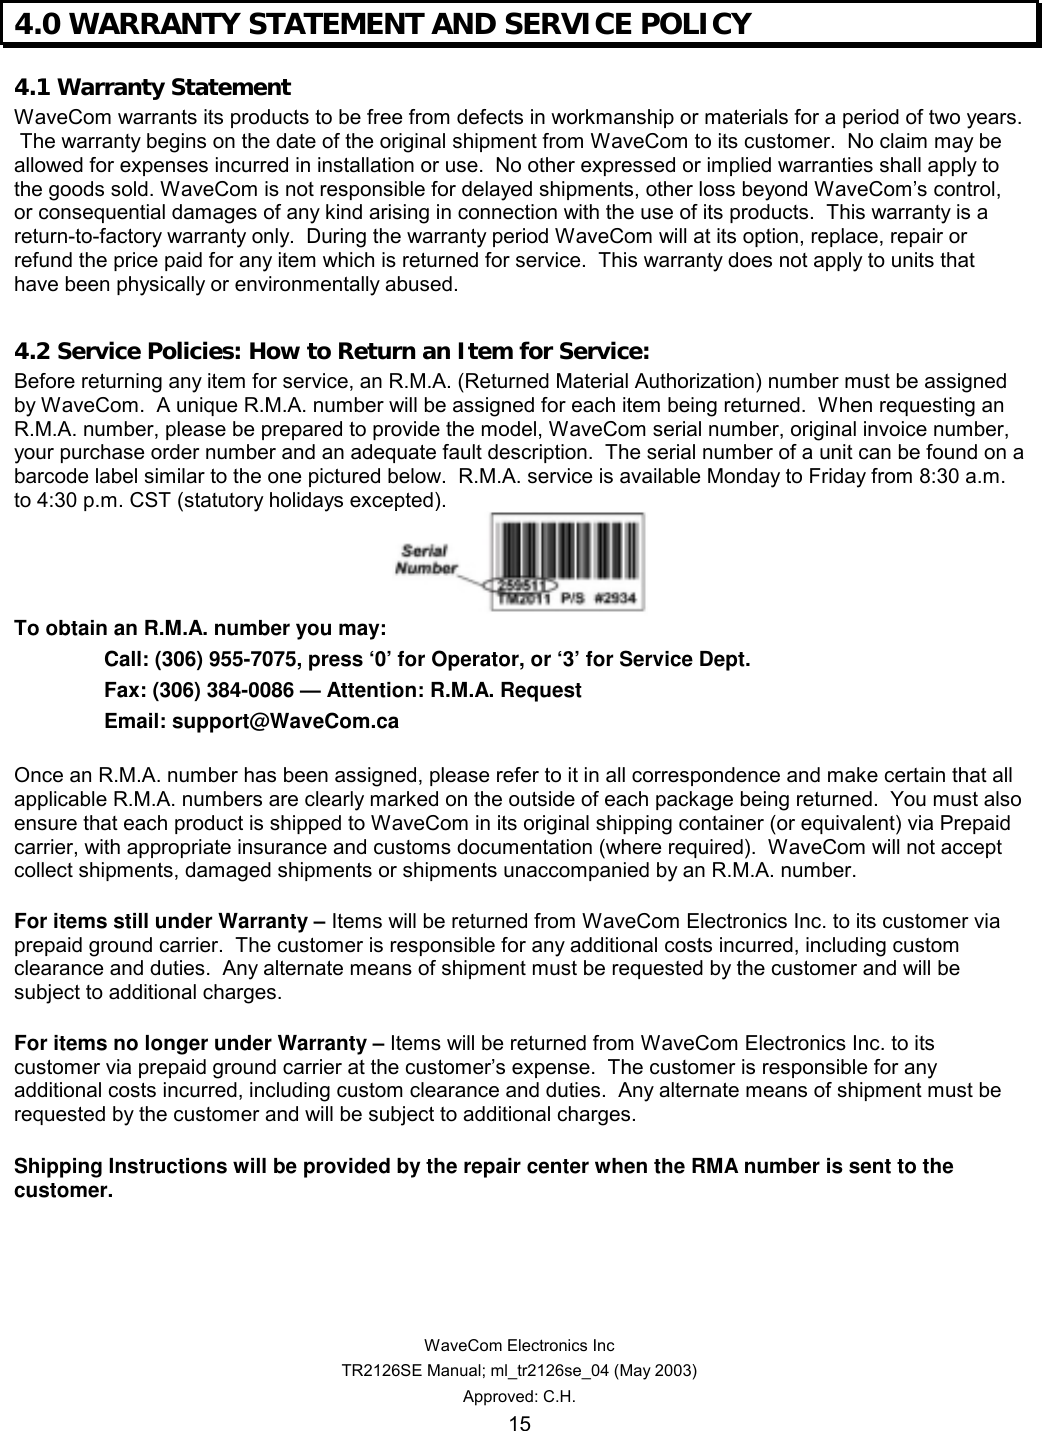   WaveCom Electronics Inc TR2126SE Manual; ml_tr2126se_04 (May 2003) Approved: C.H. 15 4.0 WARRANTY STATEMENT AND SERVICE POLICY   4.1 Warranty Statement WaveCom warrants its products to be free from defects in workmanship or materials for a period of two years.  The warranty begins on the date of the original shipment from WaveCom to its customer.  No claim may be allowed for expenses incurred in installation or use.  No other expressed or implied warranties shall apply to the goods sold. WaveCom is not responsible for delayed shipments, other loss beyond WaveCom’s control, or consequential damages of any kind arising in connection with the use of its products.  This warranty is a return-to-factory warranty only.  During the warranty period WaveCom will at its option, replace, repair or refund the price paid for any item which is returned for service.  This warranty does not apply to units that have been physically or environmentally abused.  4.2 Service Policies: How to Return an Item for Service: Before returning any item for service, an R.M.A. (Returned Material Authorization) number must be assigned by WaveCom.  A unique R.M.A. number will be assigned for each item being returned.  When requesting an R.M.A. number, please be prepared to provide the model, WaveCom serial number, original invoice number, your purchase order number and an adequate fault description.  The serial number of a unit can be found on a barcode label similar to the one pictured below.  R.M.A. service is available Monday to Friday from 8:30 a.m. to 4:30 p.m. CST (statutory holidays excepted).  To obtain an R.M.A. number you may:   Call: (306) 955-7075, press ‘0’ for Operator, or ‘3’ for Service Dept. Fax: (306) 384-0086 — Attention: R.M.A. Request Email: support@WaveCom.ca  Once an R.M.A. number has been assigned, please refer to it in all correspondence and make certain that all applicable R.M.A. numbers are clearly marked on the outside of each package being returned.  You must also ensure that each product is shipped to WaveCom in its original shipping container (or equivalent) via Prepaid carrier, with appropriate insurance and customs documentation (where required).  WaveCom will not accept collect shipments, damaged shipments or shipments unaccompanied by an R.M.A. number.  For items still under Warranty – Items will be returned from WaveCom Electronics Inc. to its customer via prepaid ground carrier.  The customer is responsible for any additional costs incurred, including custom clearance and duties.  Any alternate means of shipment must be requested by the customer and will be subject to additional charges.   For items no longer under Warranty – Items will be returned from WaveCom Electronics Inc. to its customer via prepaid ground carrier at the customer’s expense.  The customer is responsible for any additional costs incurred, including custom clearance and duties.  Any alternate means of shipment must be requested by the customer and will be subject to additional charges.  Shipping Instructions will be provided by the repair center when the RMA number is sent to the customer.  